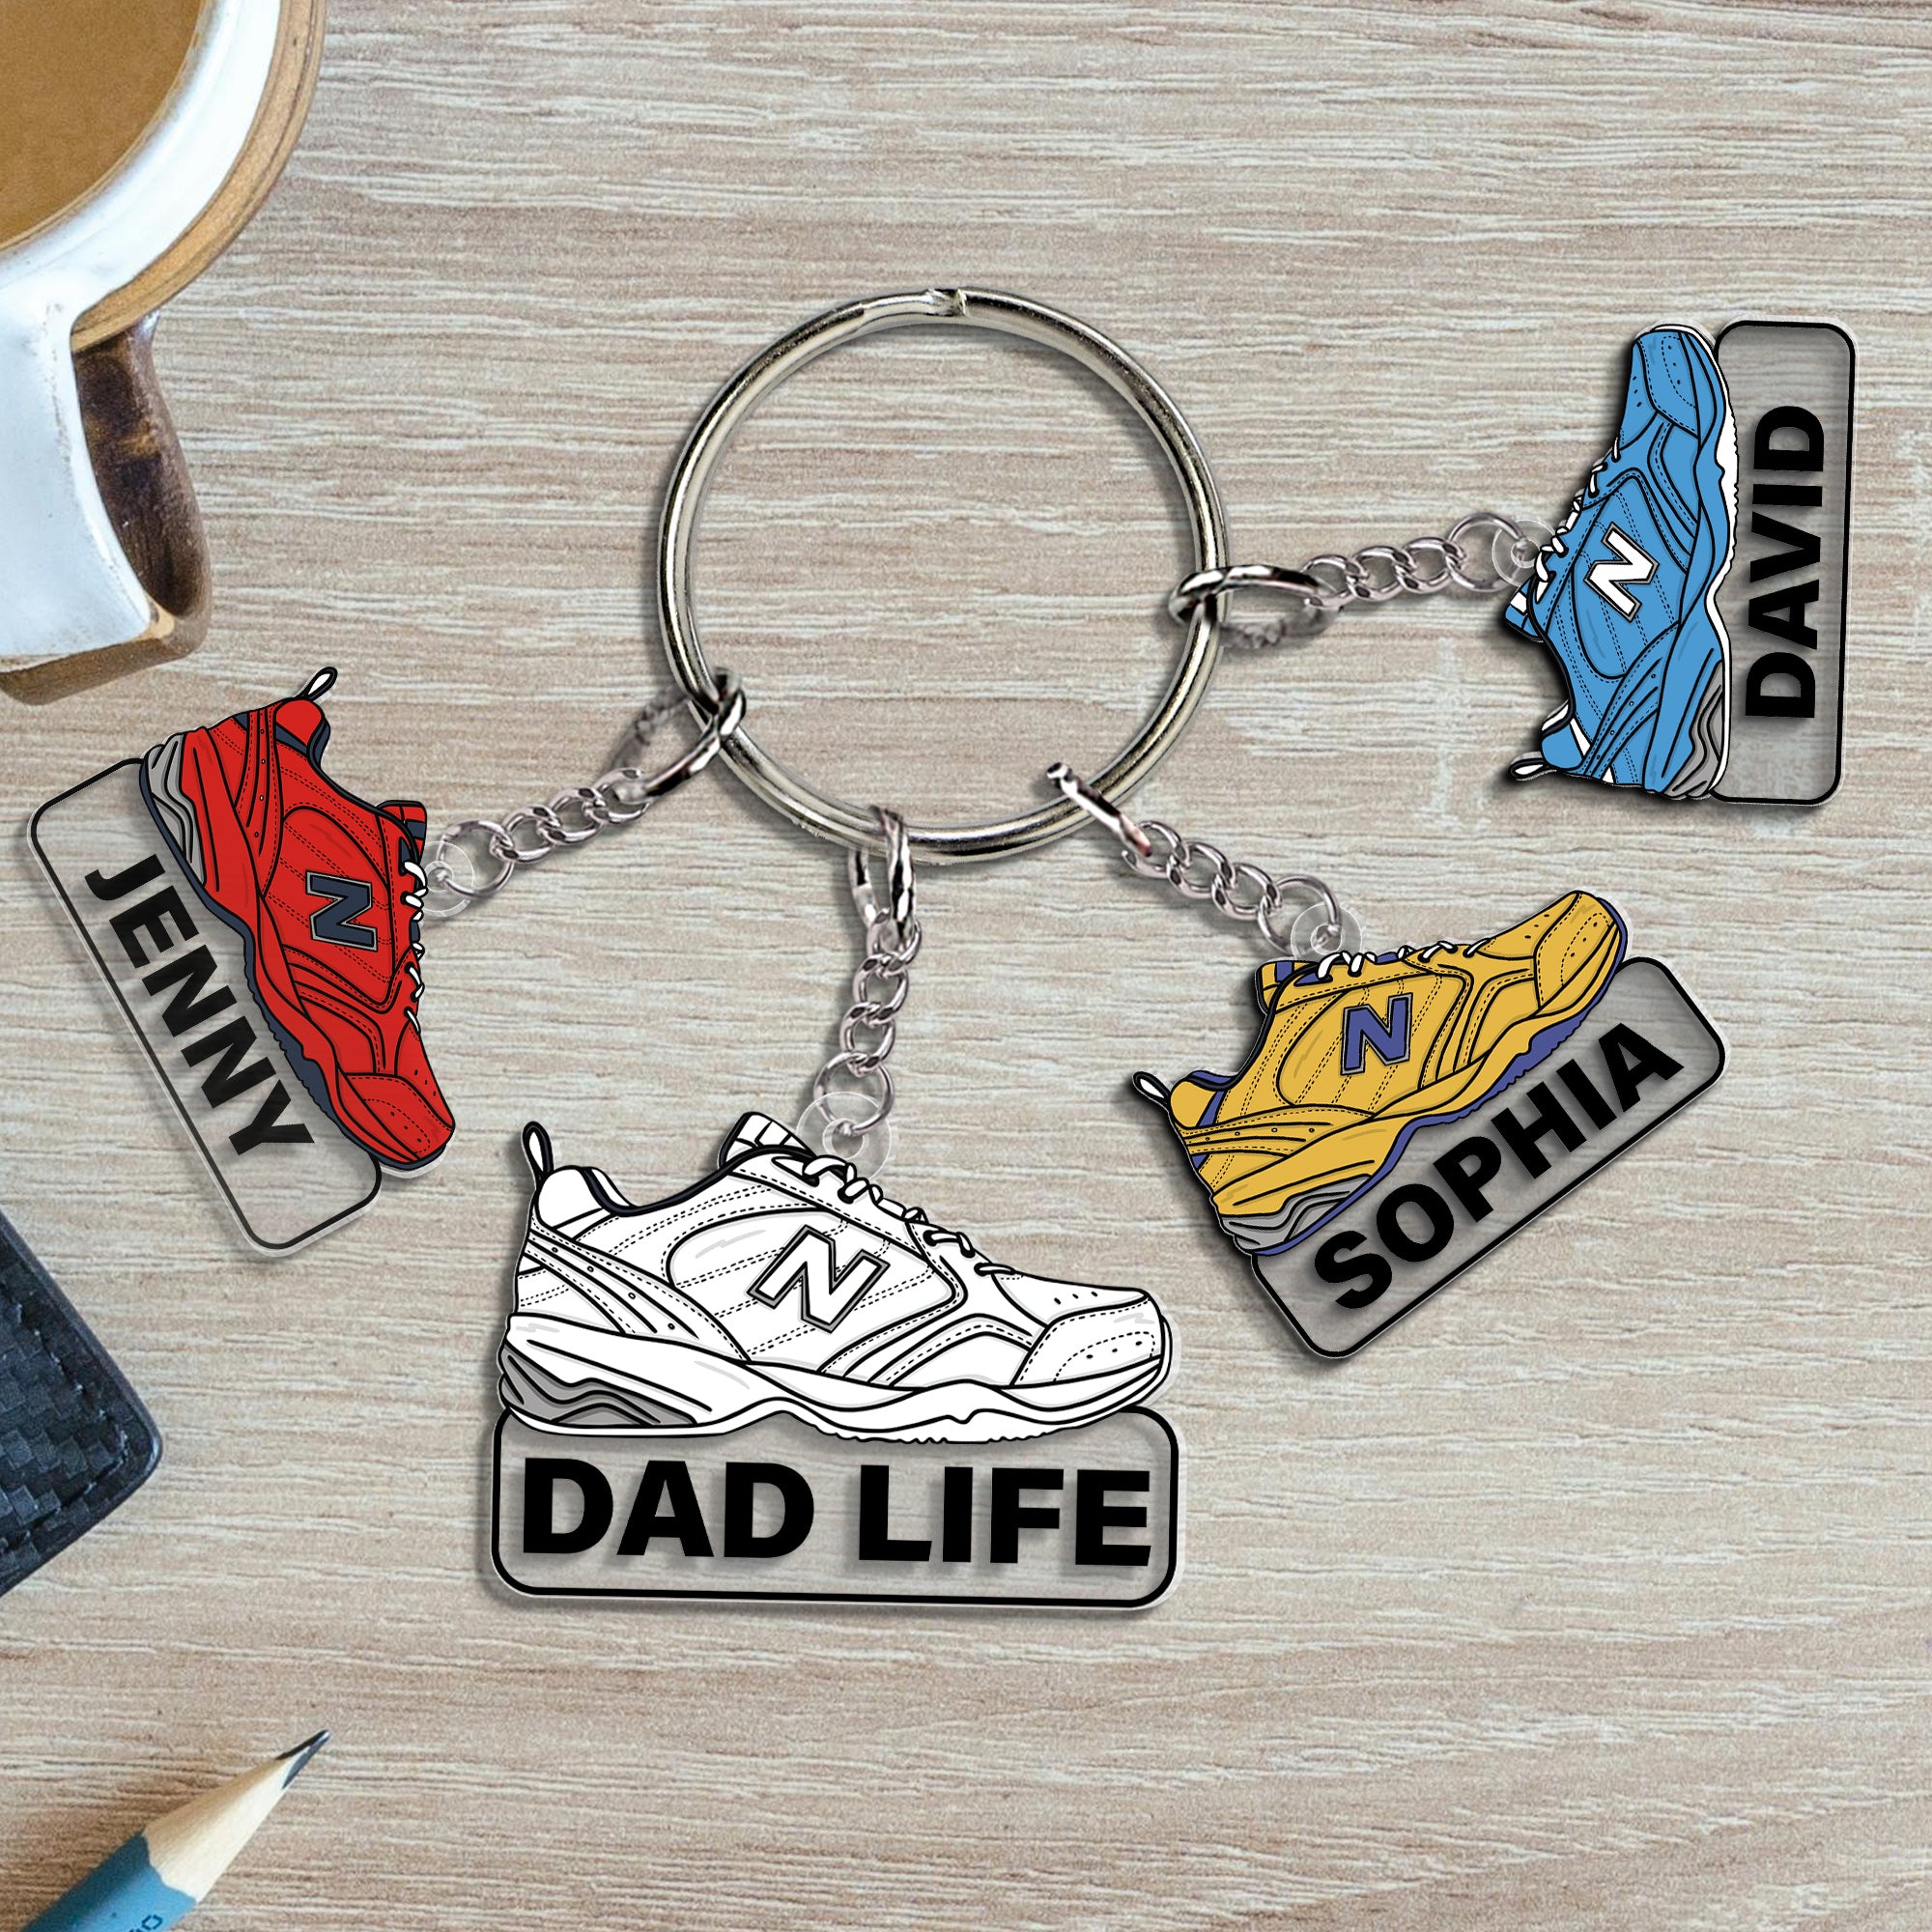 Personalized Gifts For Dad Keychain With Shoes Charms 01natn170524-Homacus